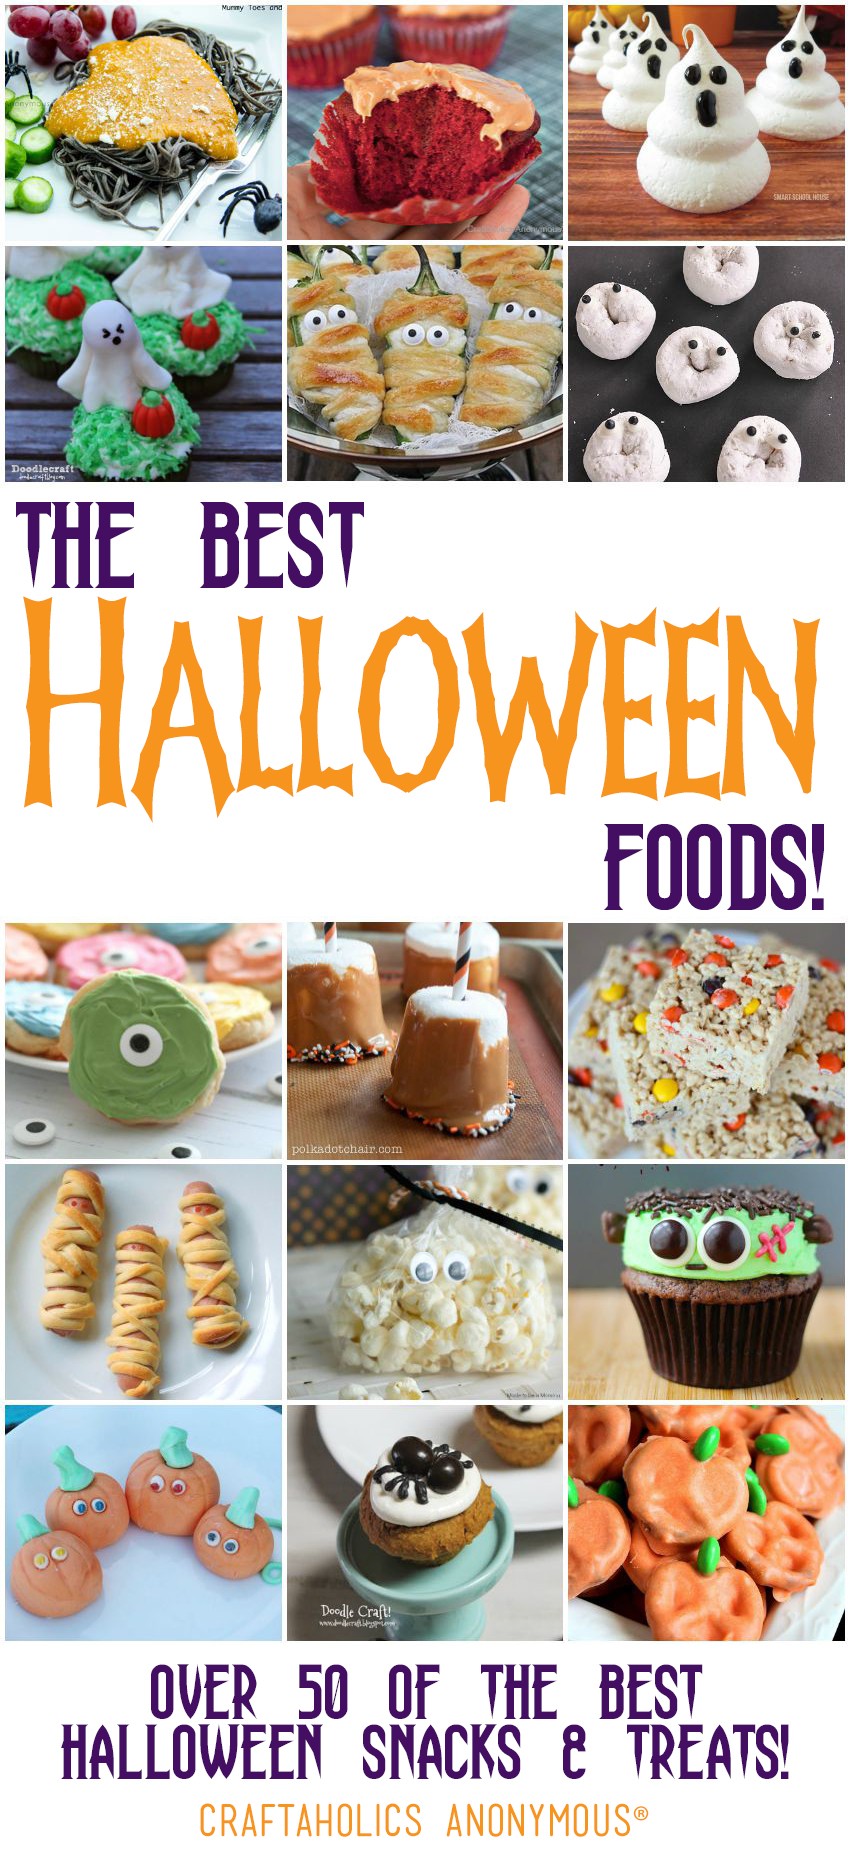 50 of the Best Halloween Foods | Craftaholics Anonymous®